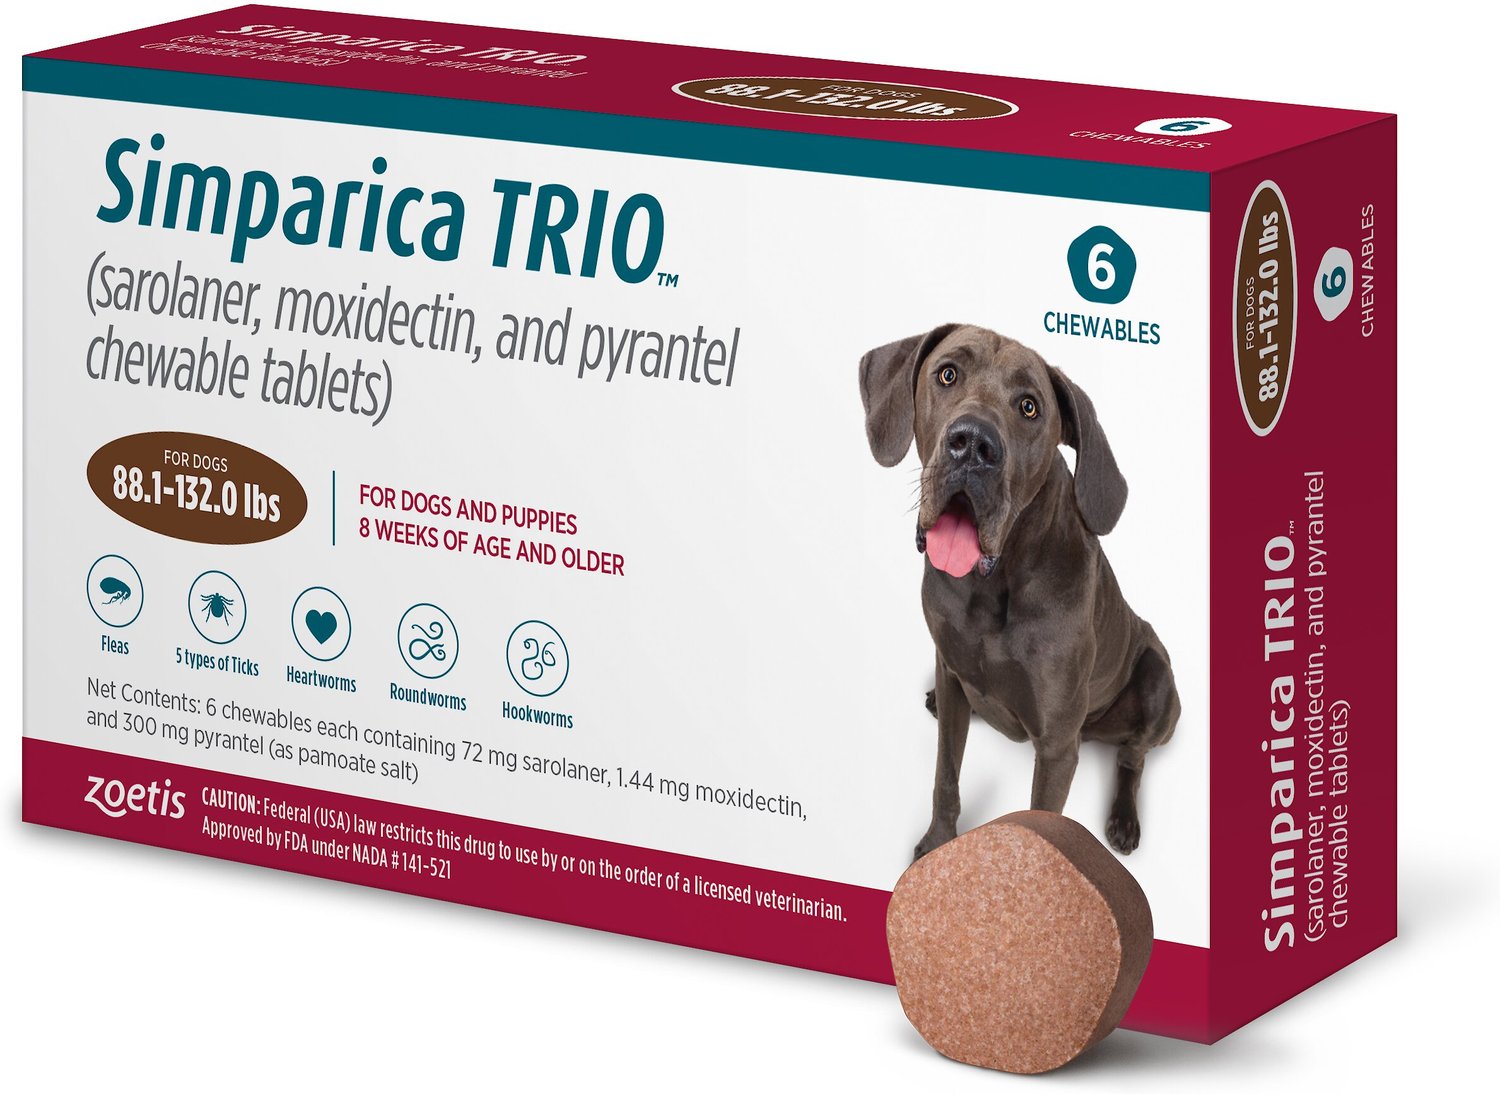 simparica for large dogs